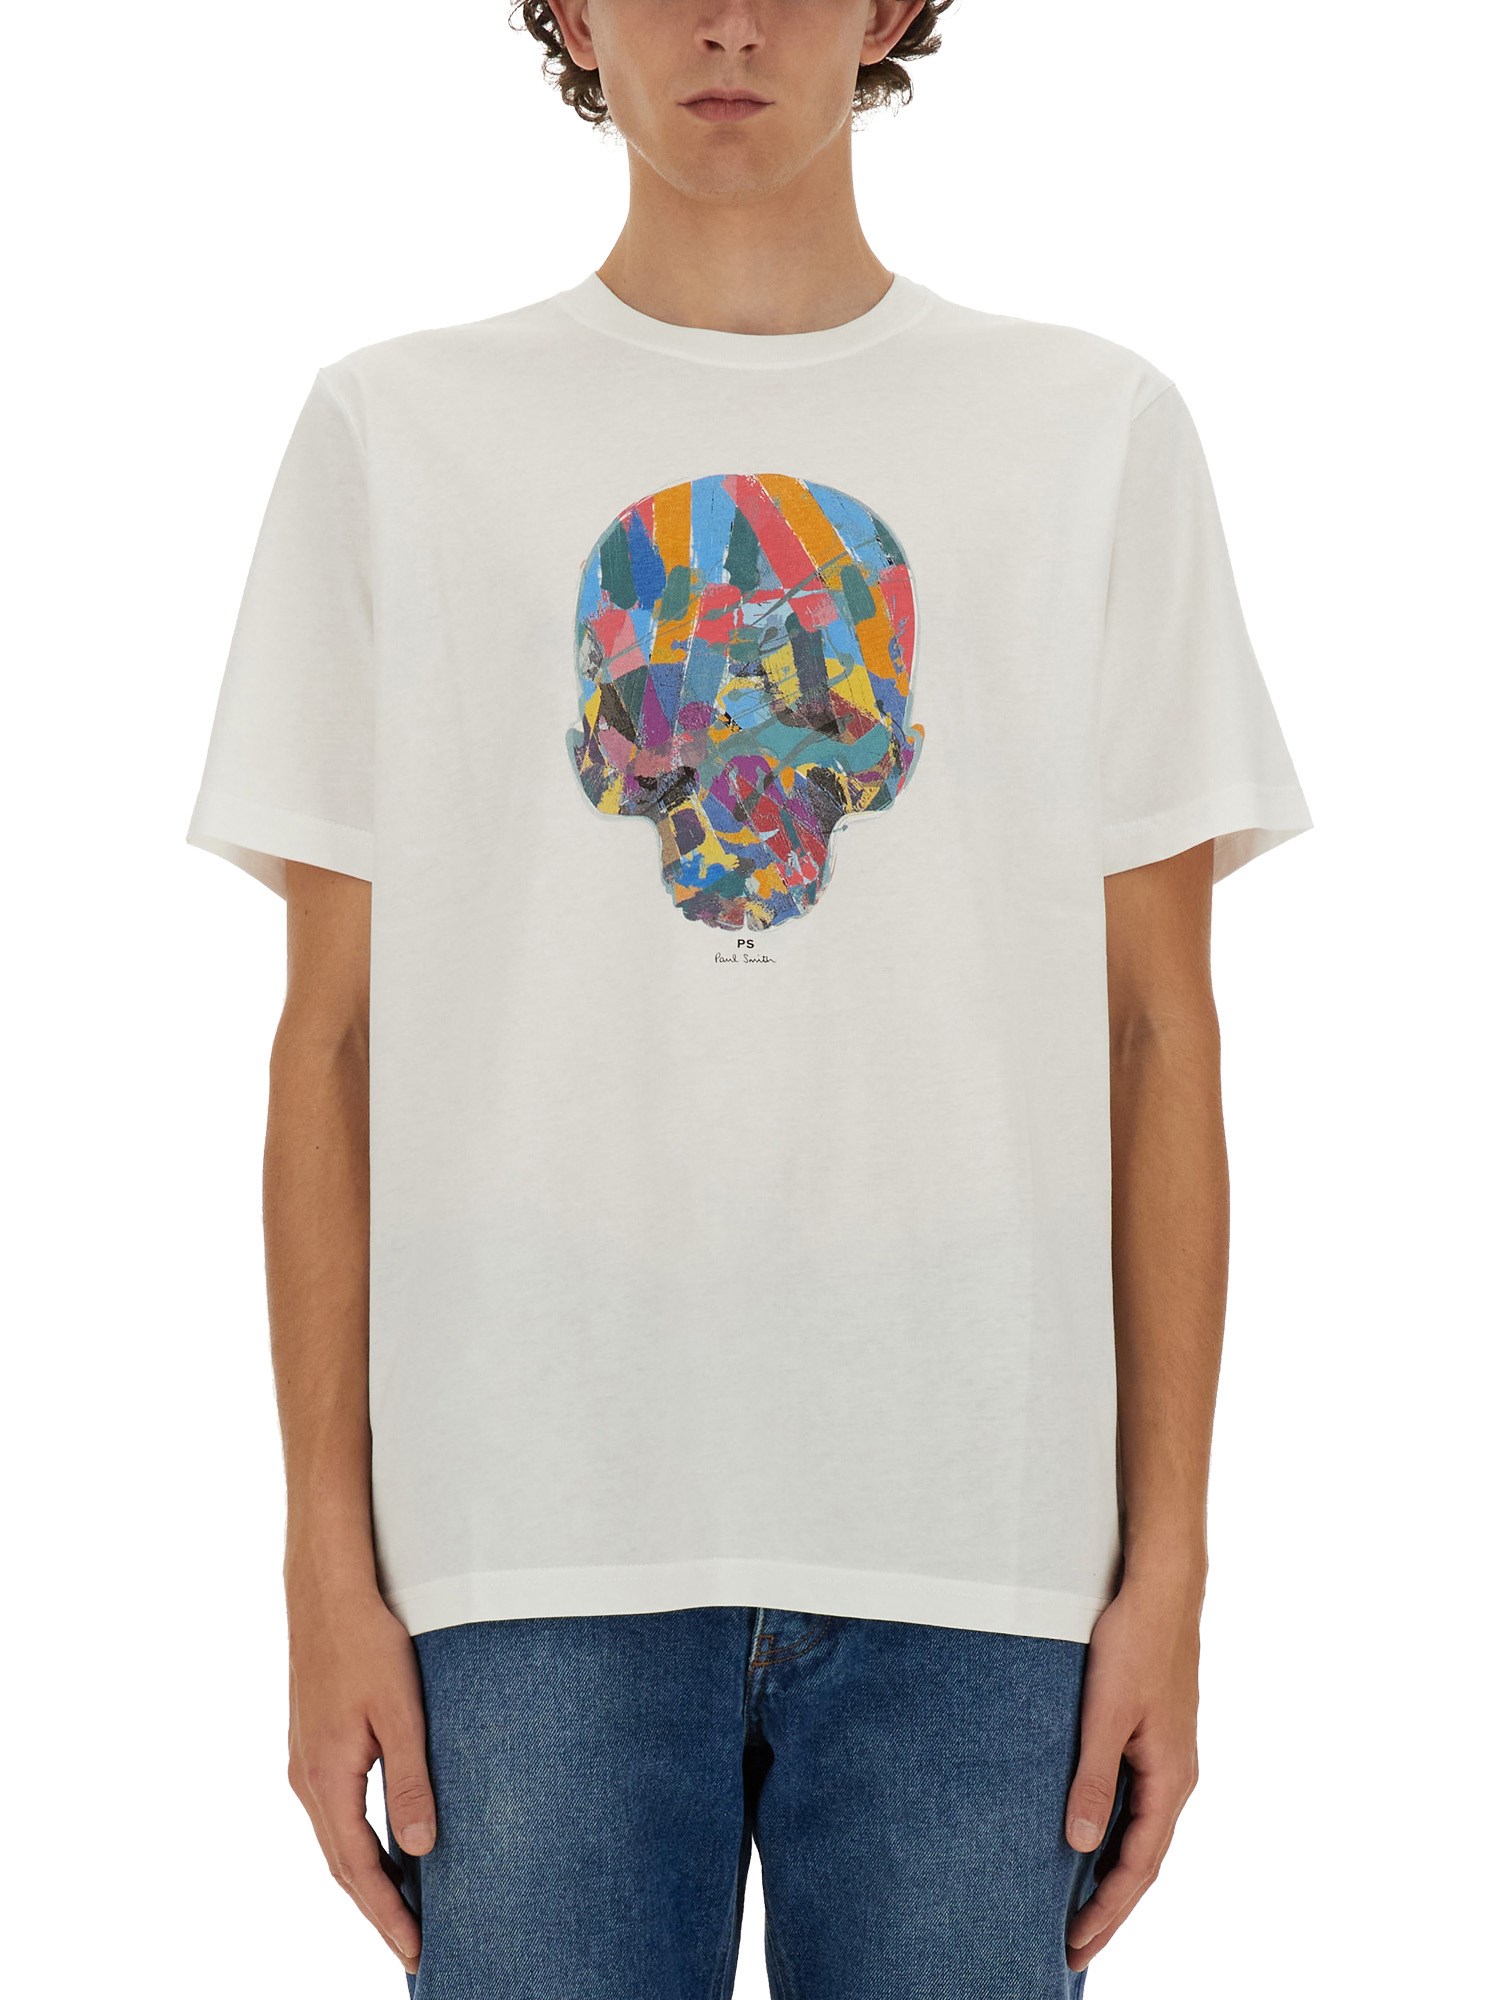  ps by paul smith skull t-shirt